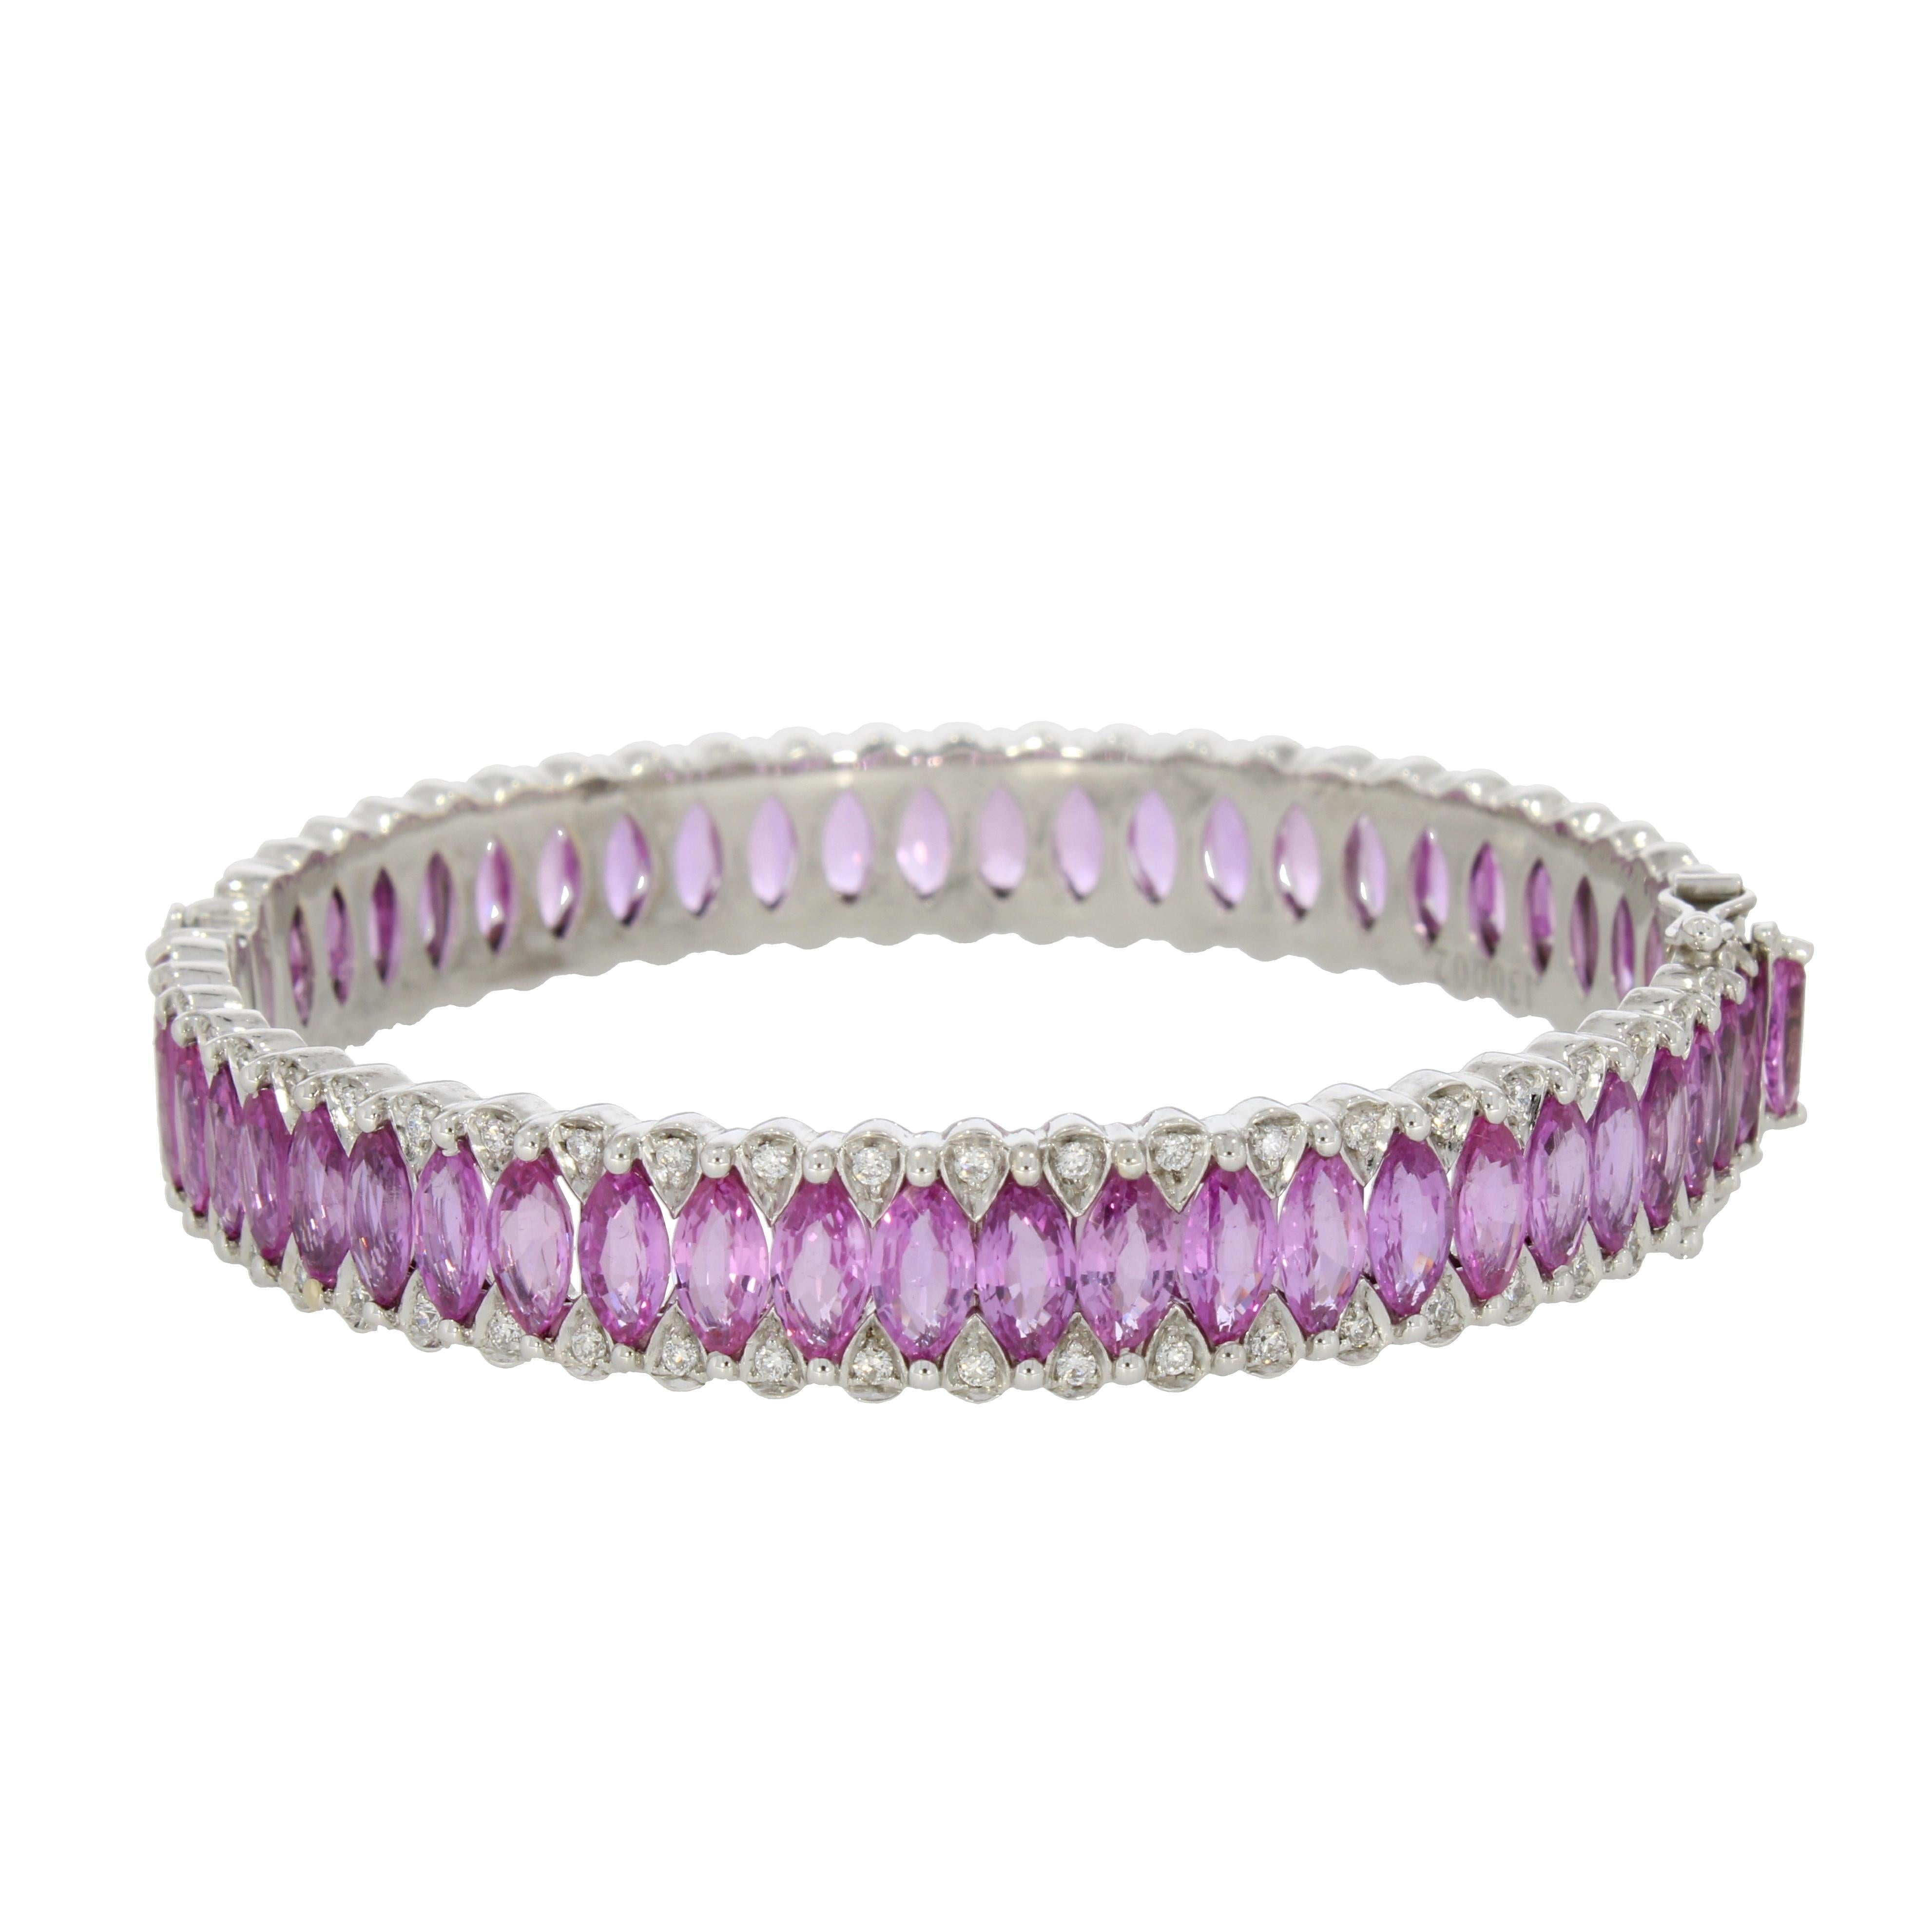 Contemporary 18 Karat White Gold Marquise Pink Sapphire and Diamonds Amore Bangle by Niquesa